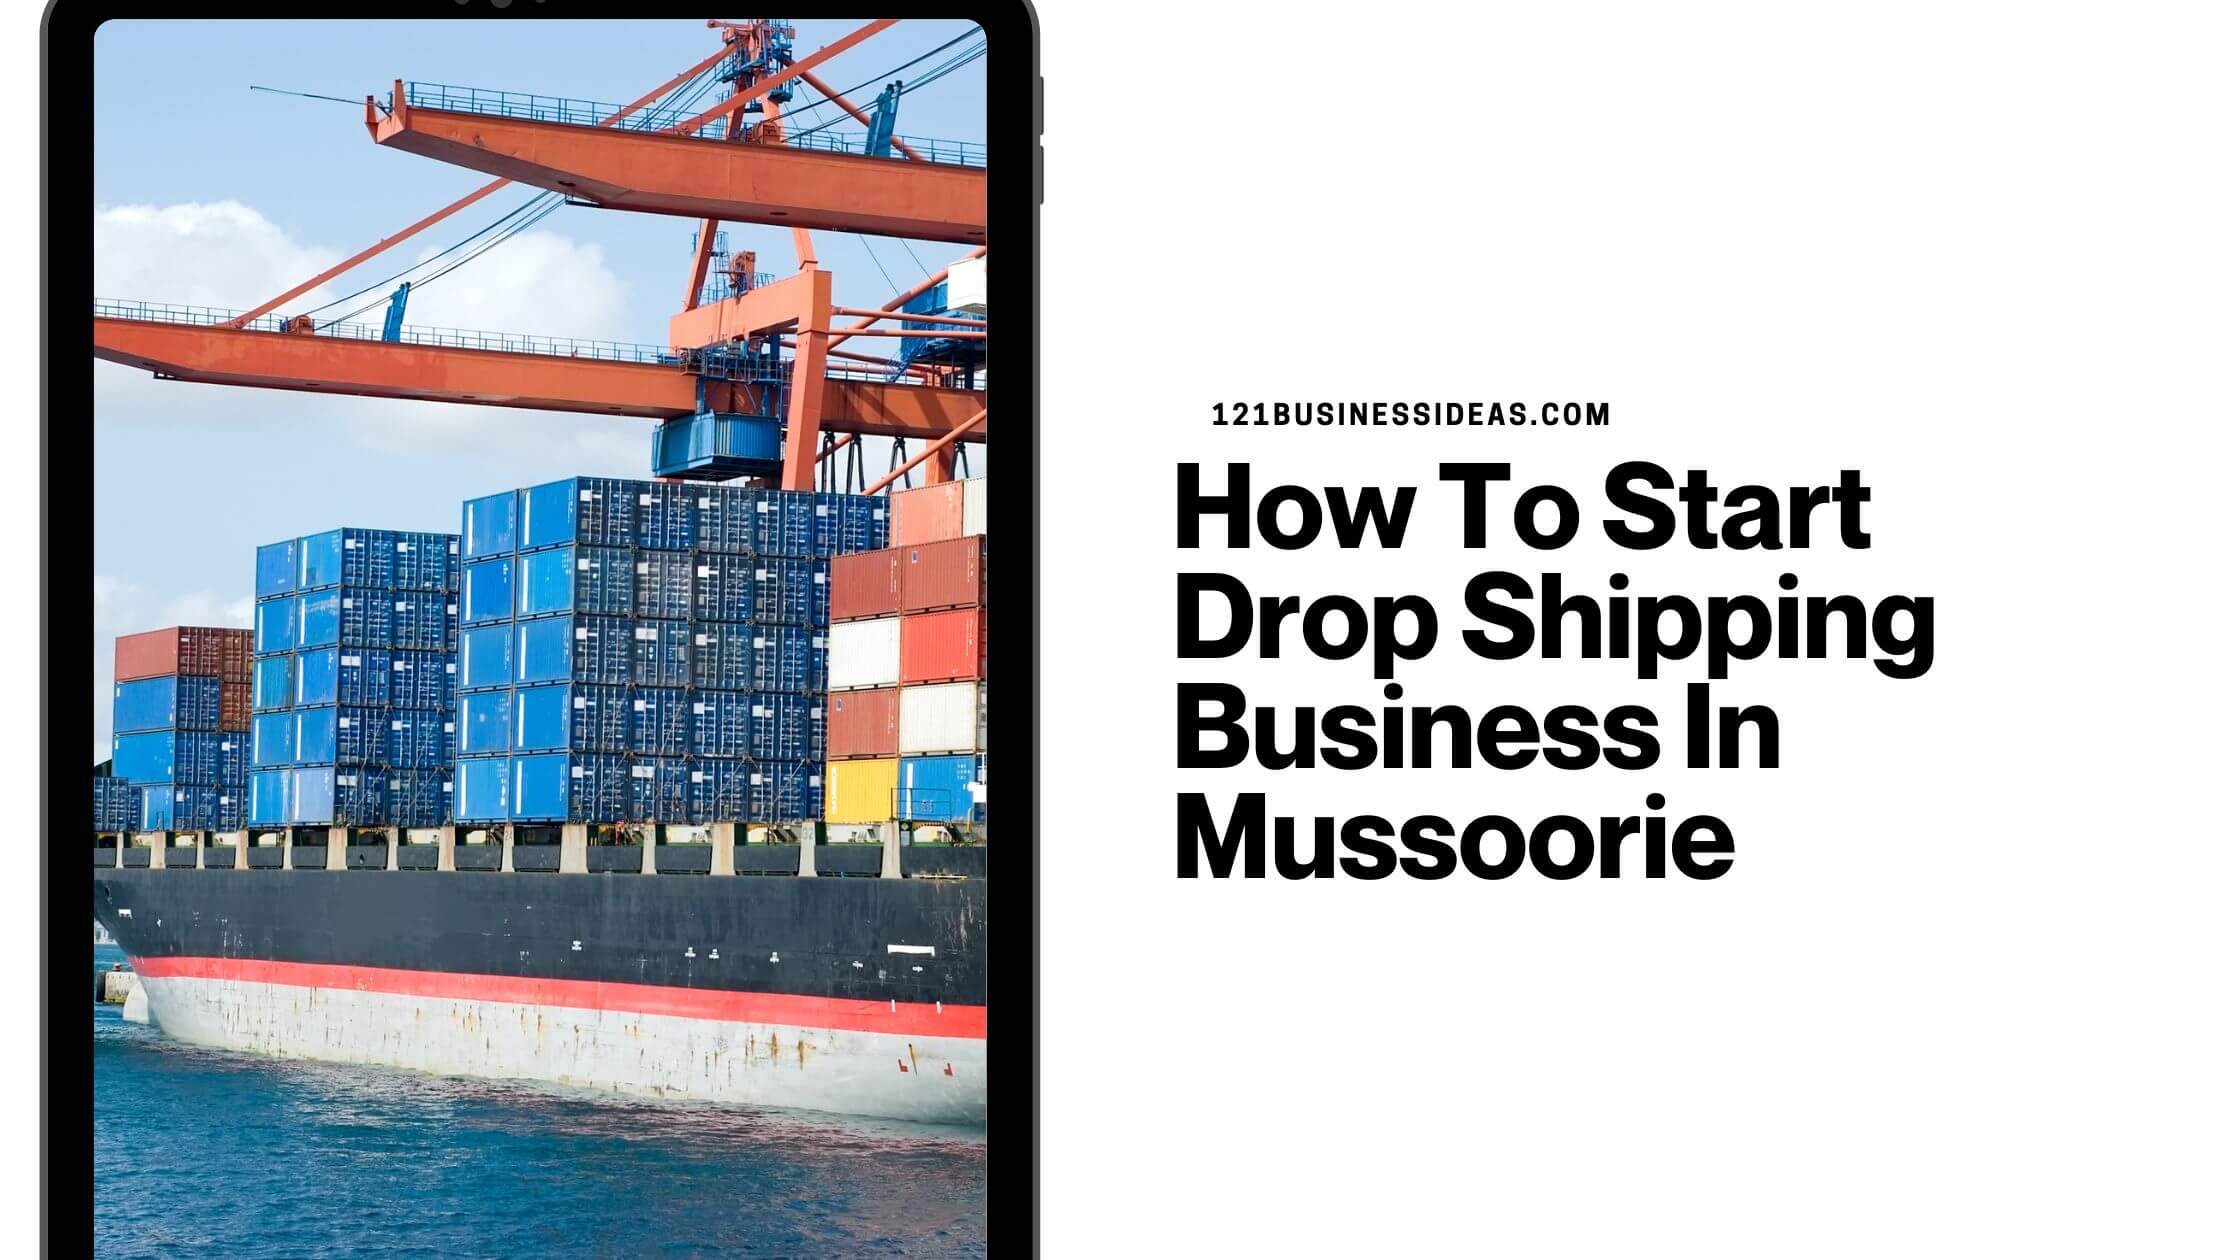 How To Start Drop Shipping Business In Mussoorie (1) (1)